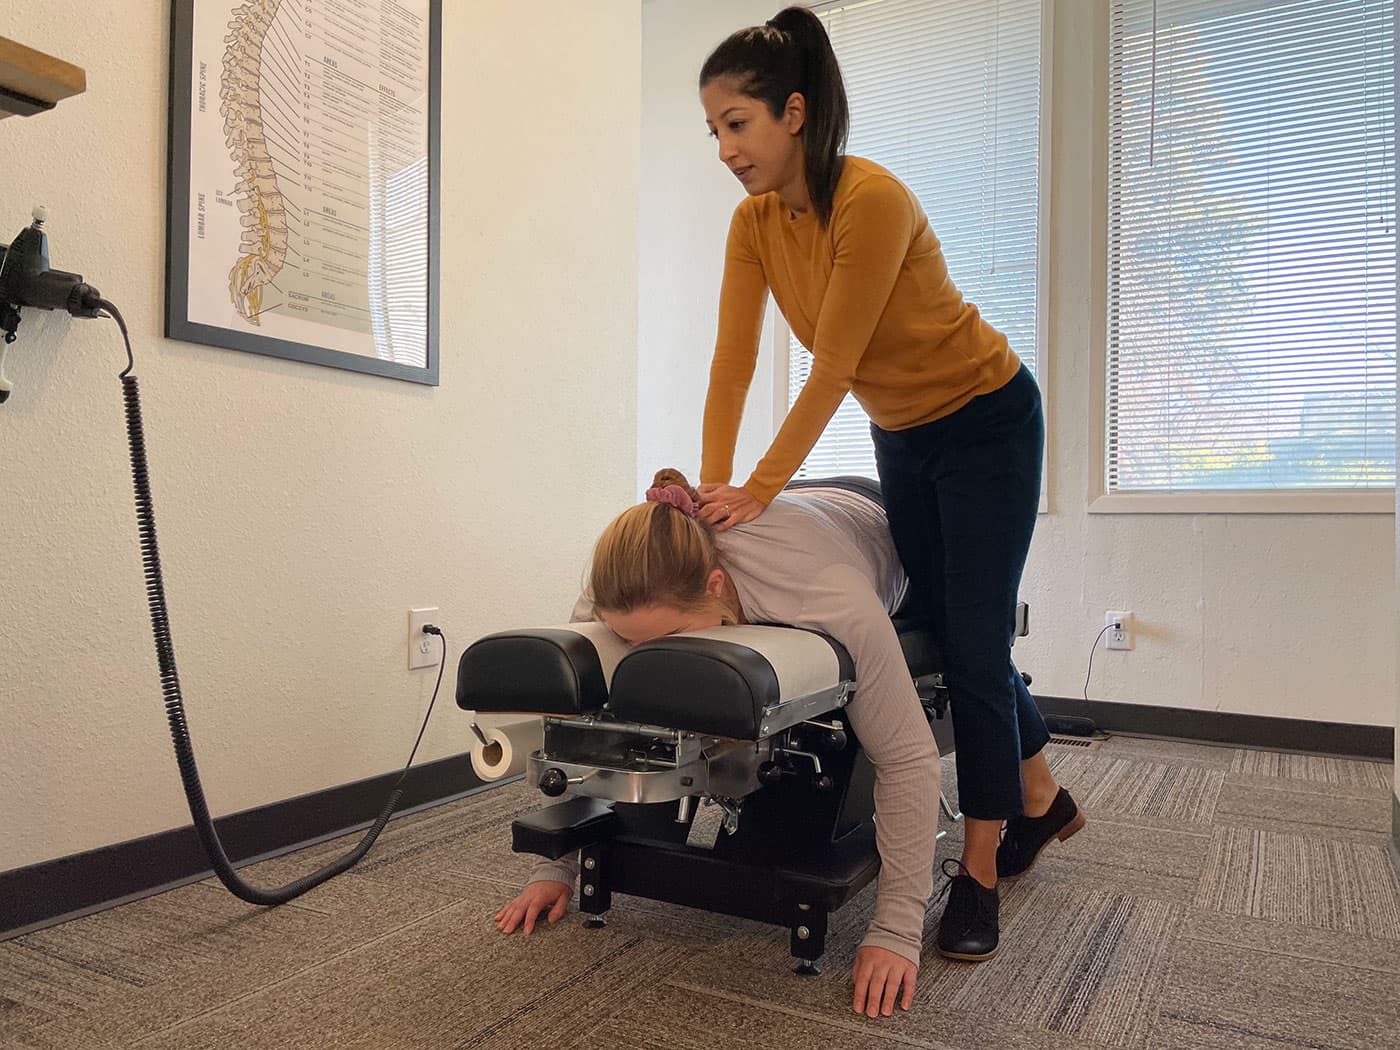 Chiropractic care performed on a young woman at Elevation Spine Center in Bend, Oregon